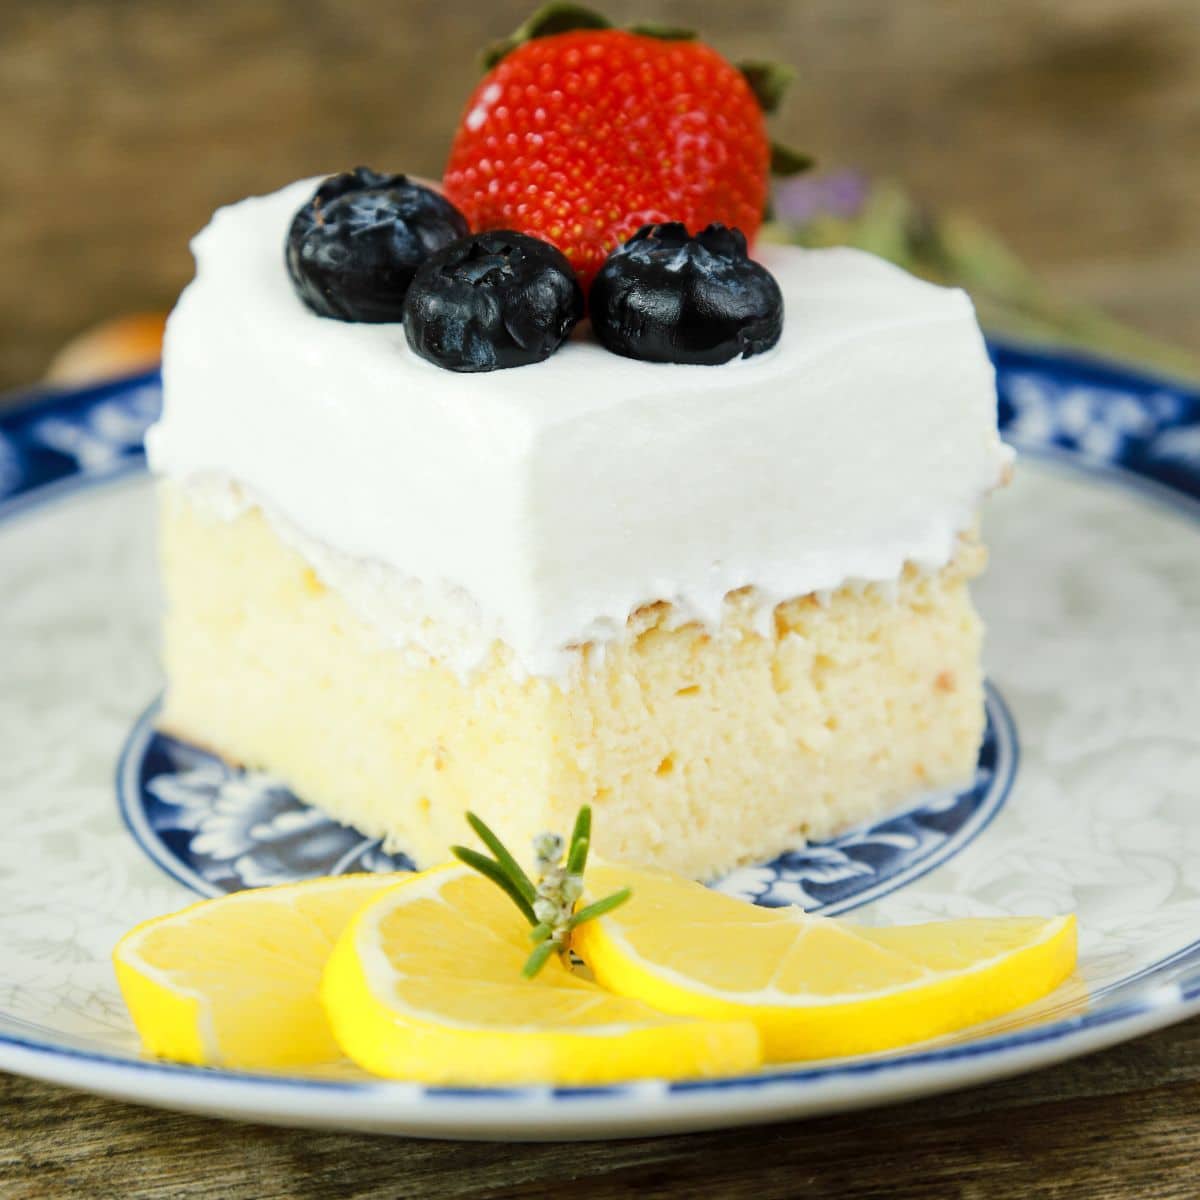 slice of cake topped with berries on white and blue plate